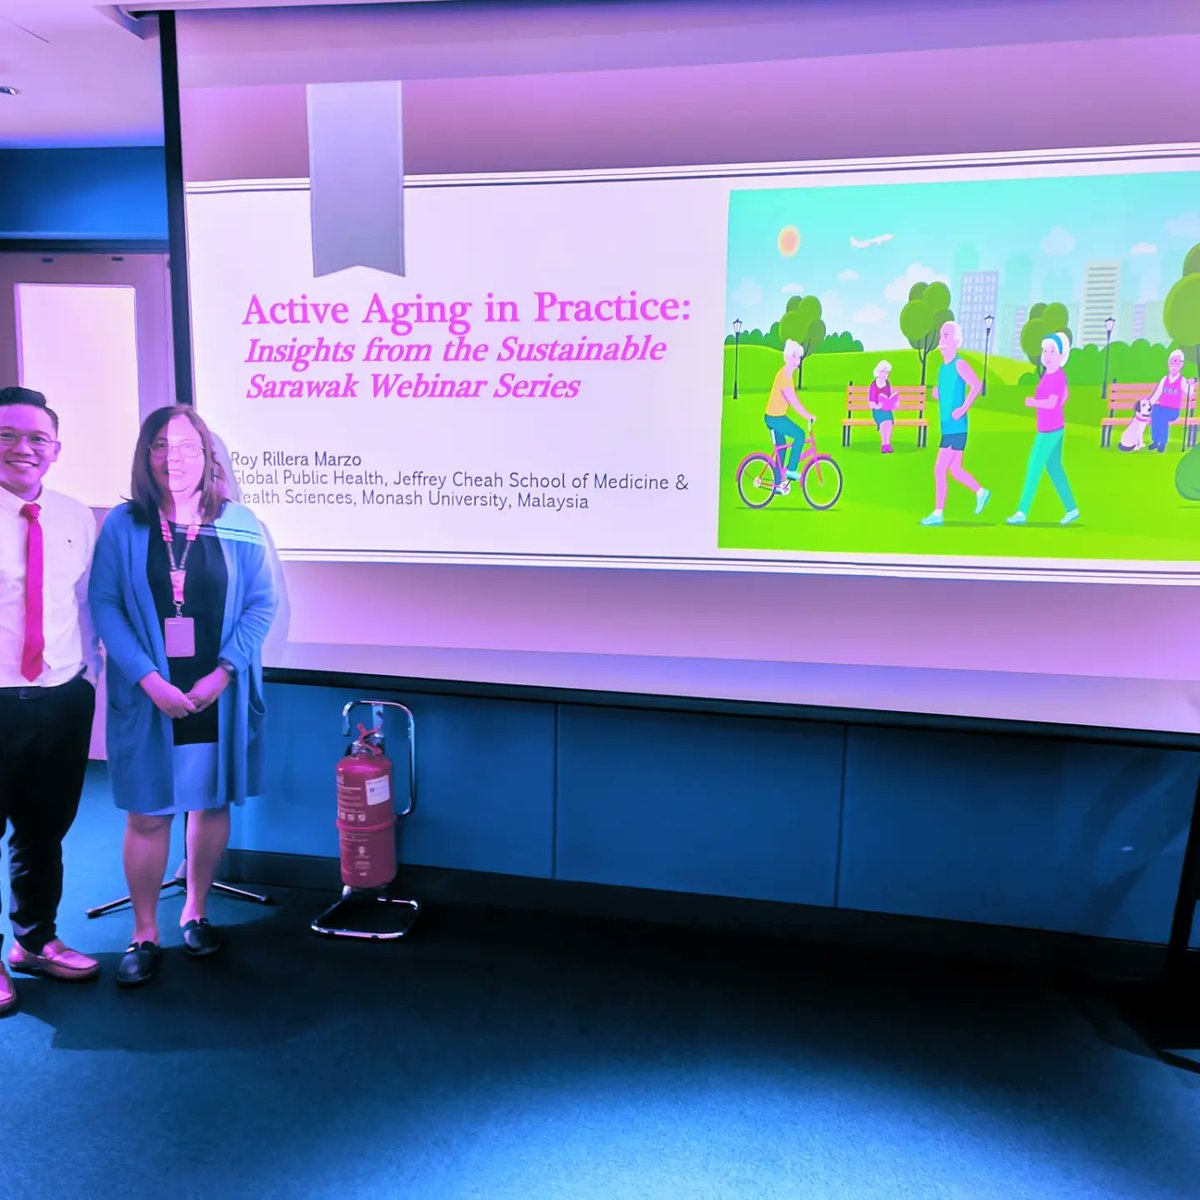 Excited to share about my recent Graduate Seminar presentation on 'Active Ageing in Practice' at Monash University, Malaysia. Thanks to Prof. Tin Tin Su, an empowered and transformational leader in Public Health, for her mentorship. 
 #MonashUniversity #ActiveAgeing #PublicHealth